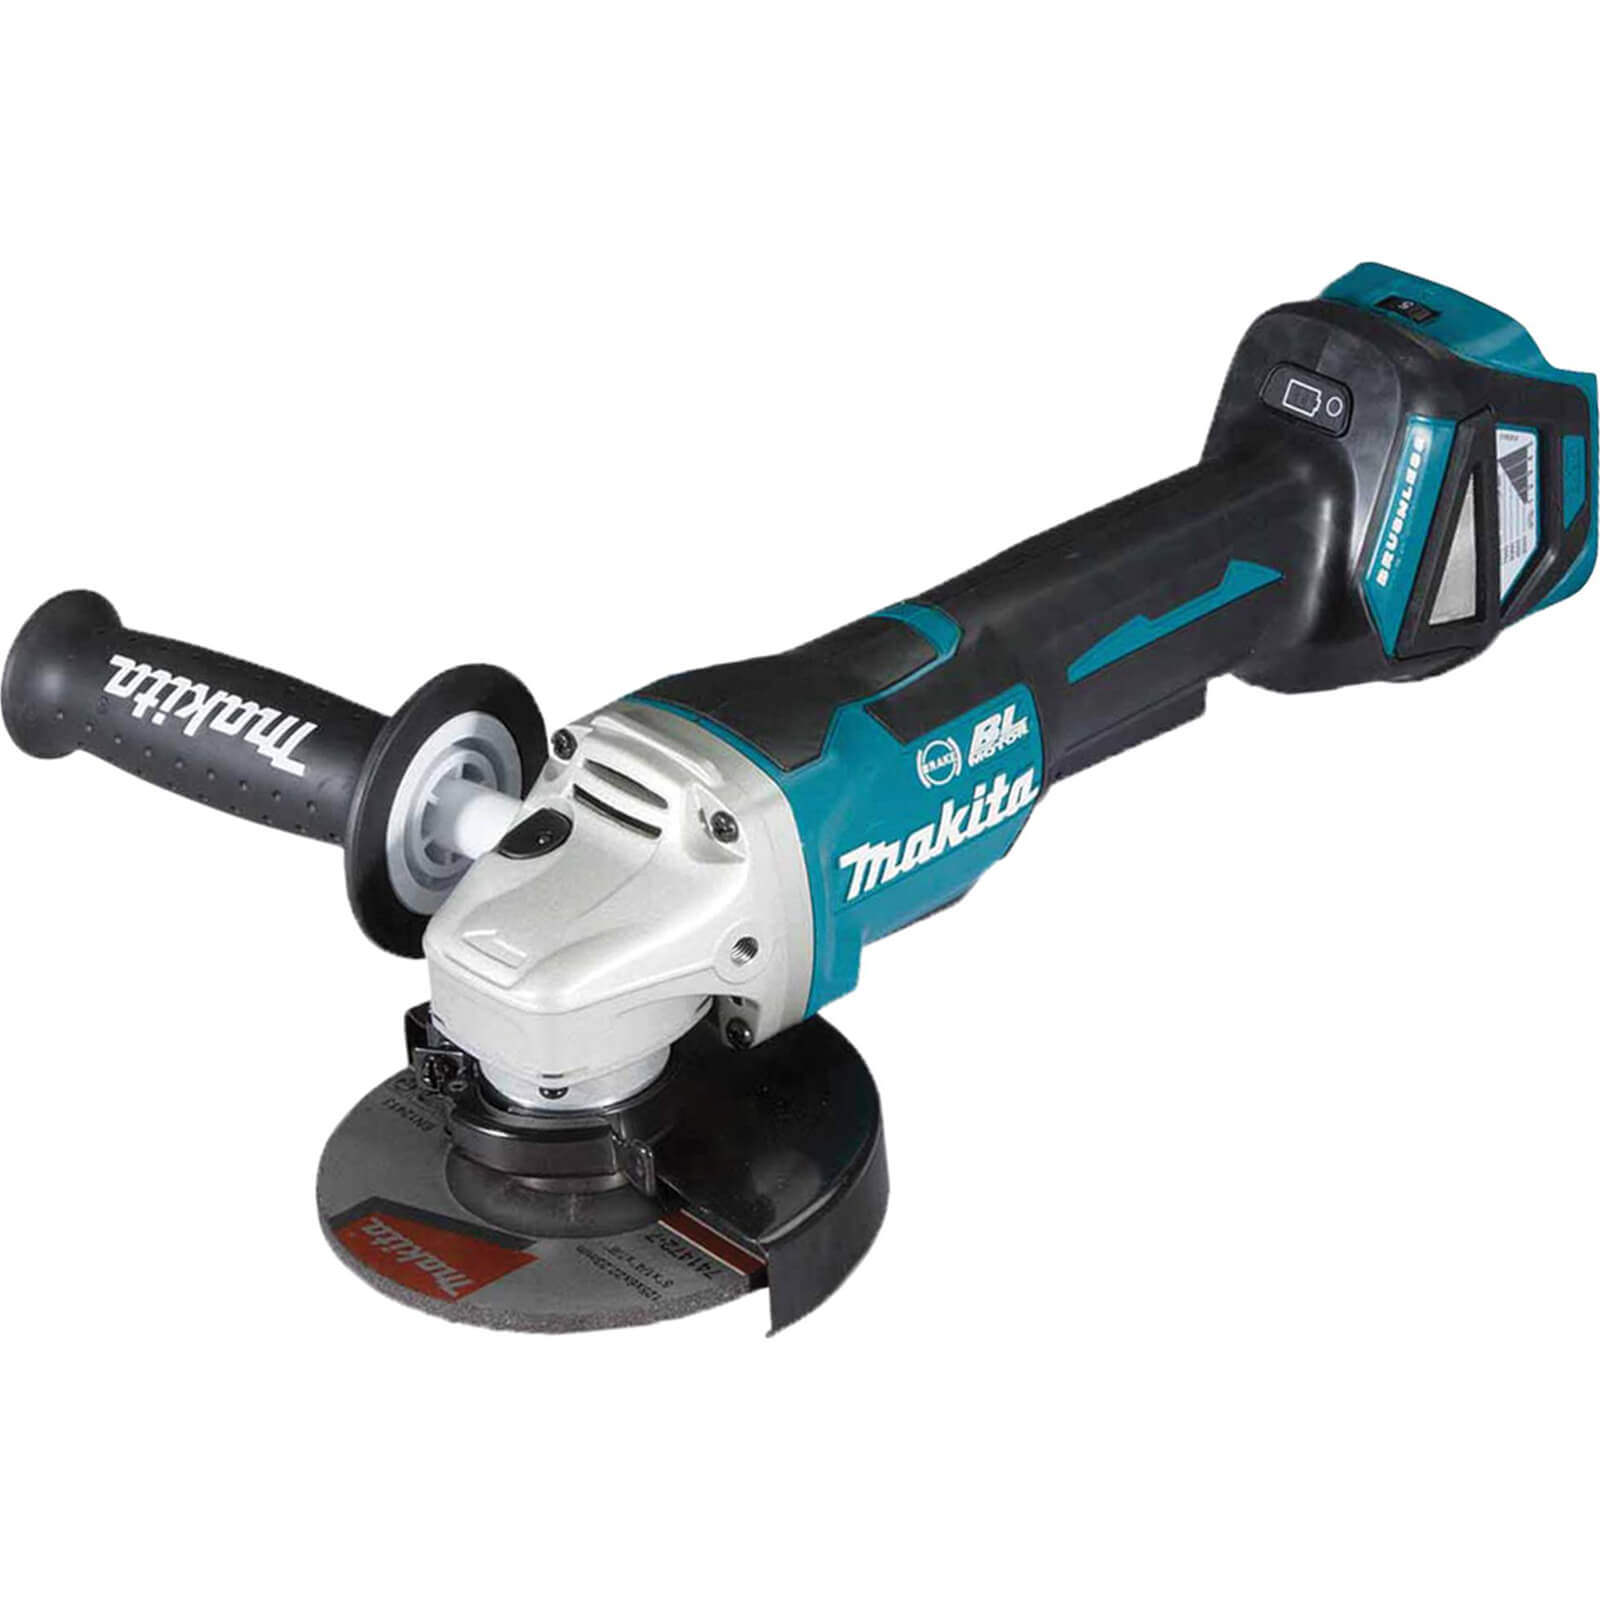 Image of Makita DGA517 18v LXT Cordless Brushless Paddle Switch Angle Grinder 125mm No Batteries No Charger No Case